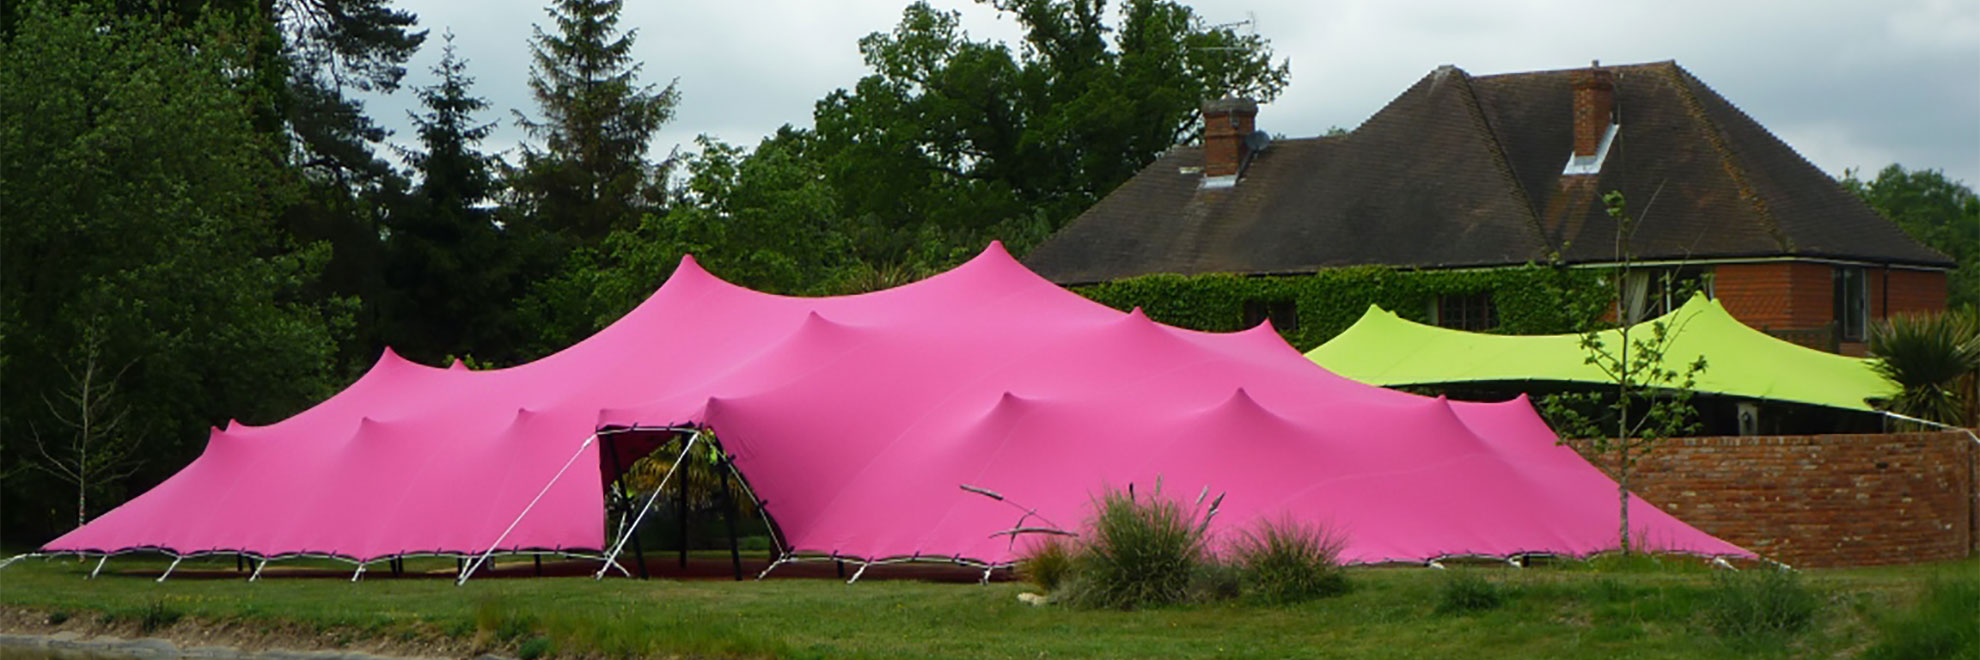 pink stretch tent with door opening